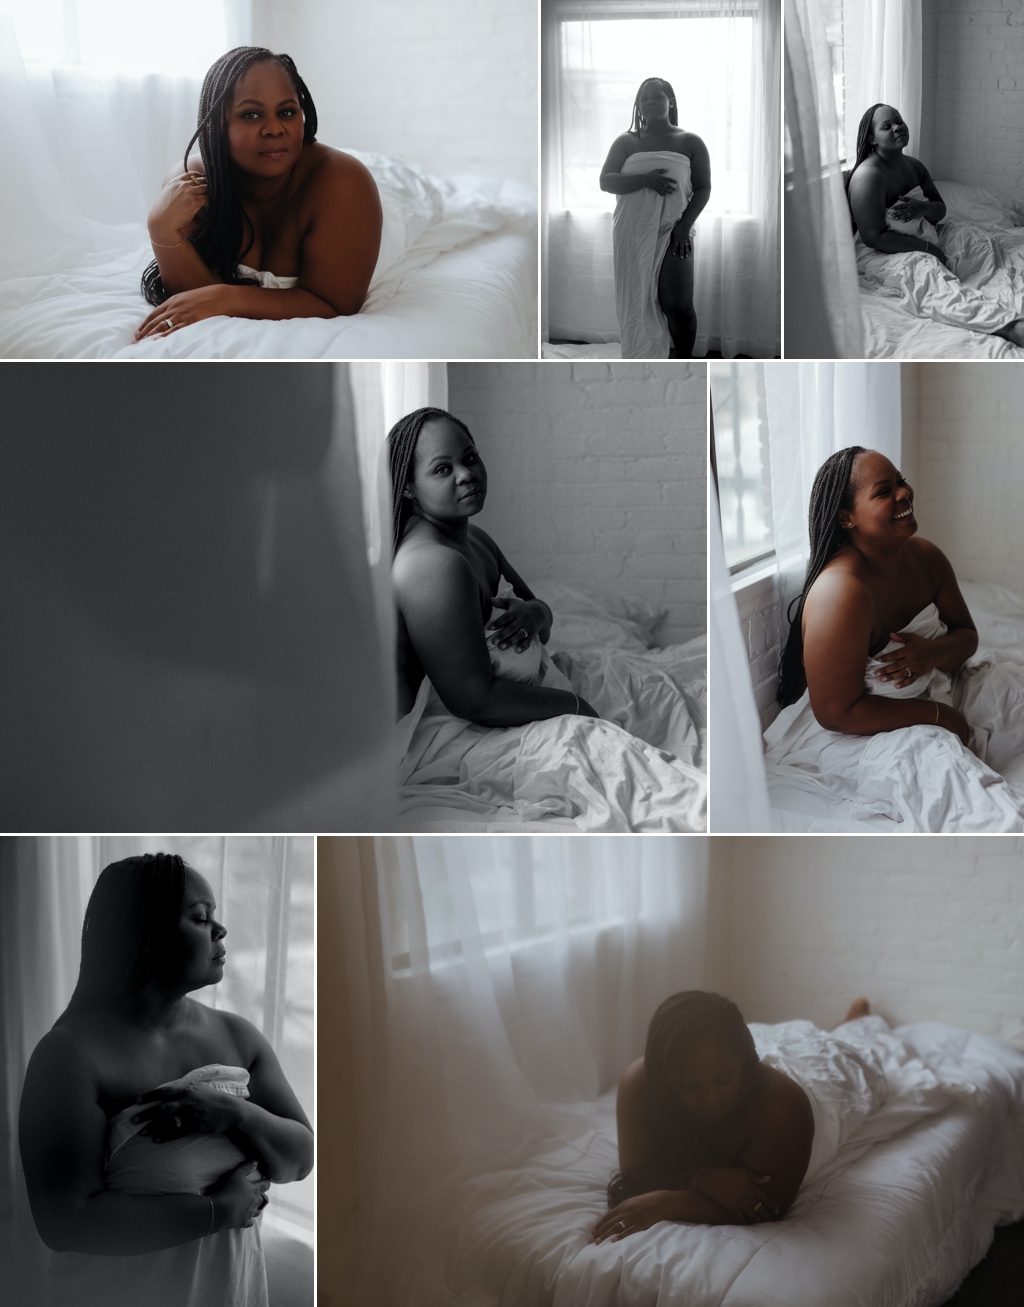 a curvy black woman with braids poses in front of a naturally lit window while wrapped in a white sheet, posing for boudoir photography photos